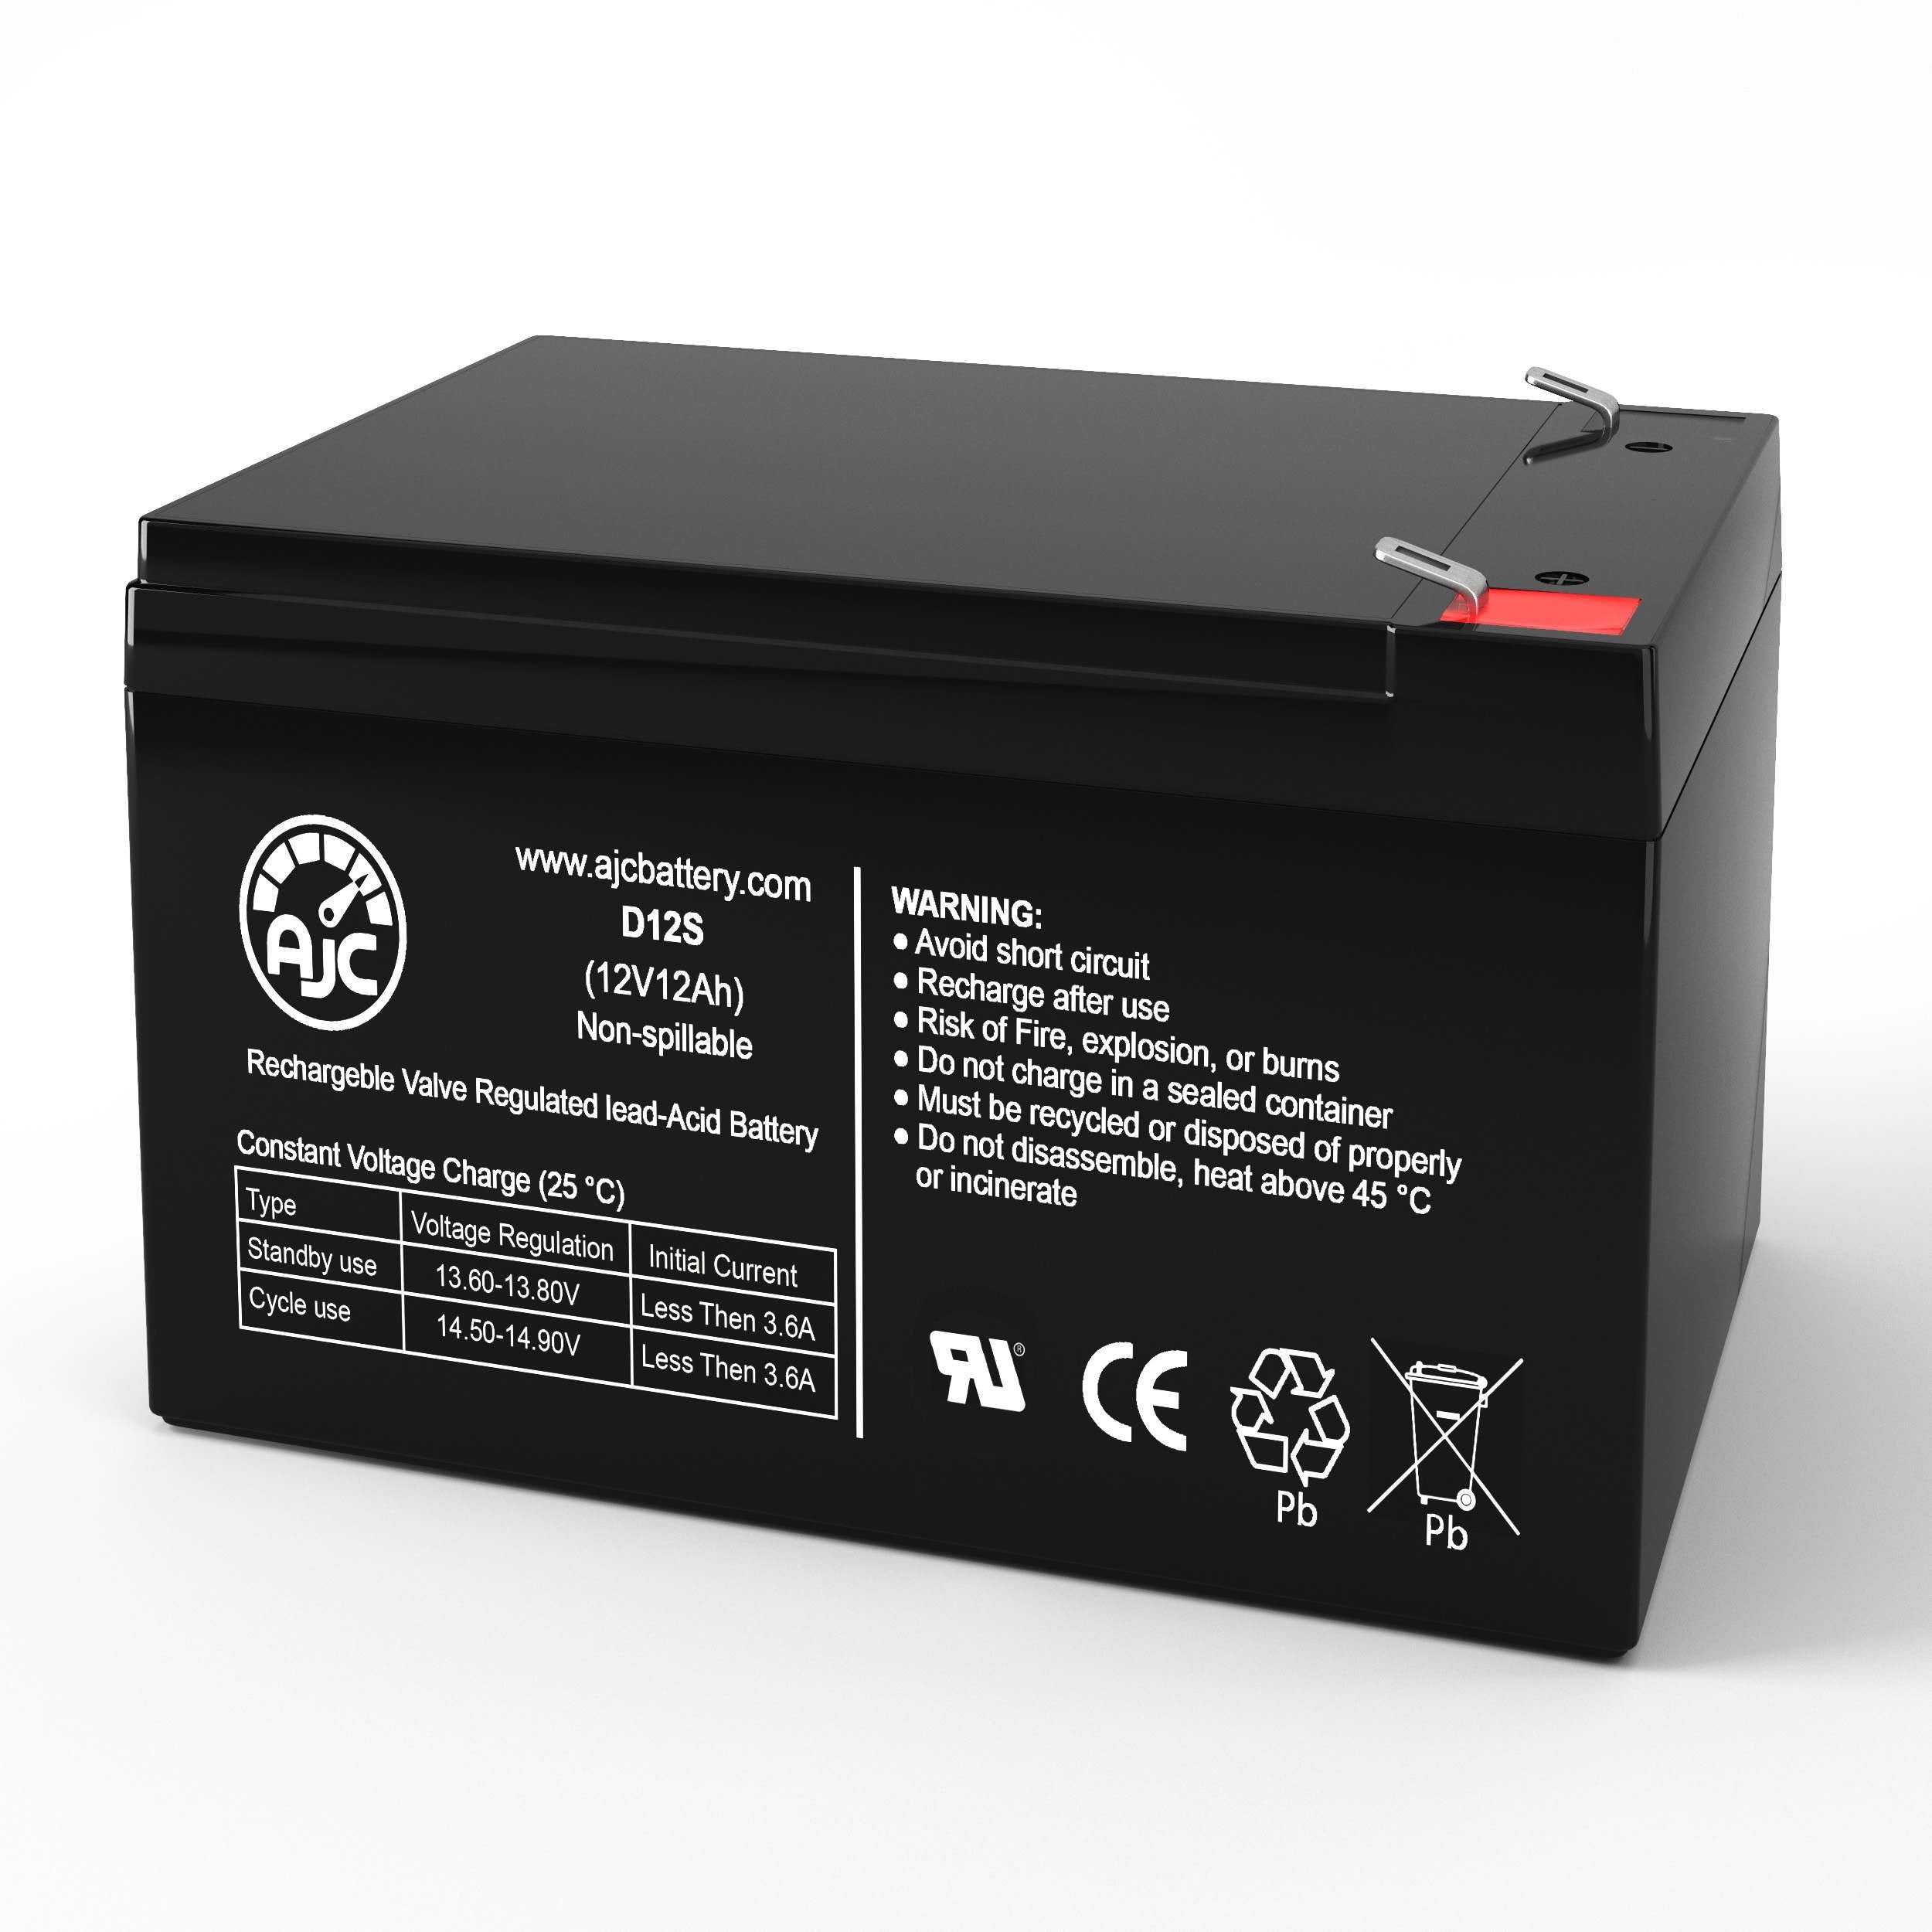 Haijiu 6-DFM-12A 12V 12Ah Mobility Scooter Replacement Battery:  BatteryClerk.com Mobility Scooter